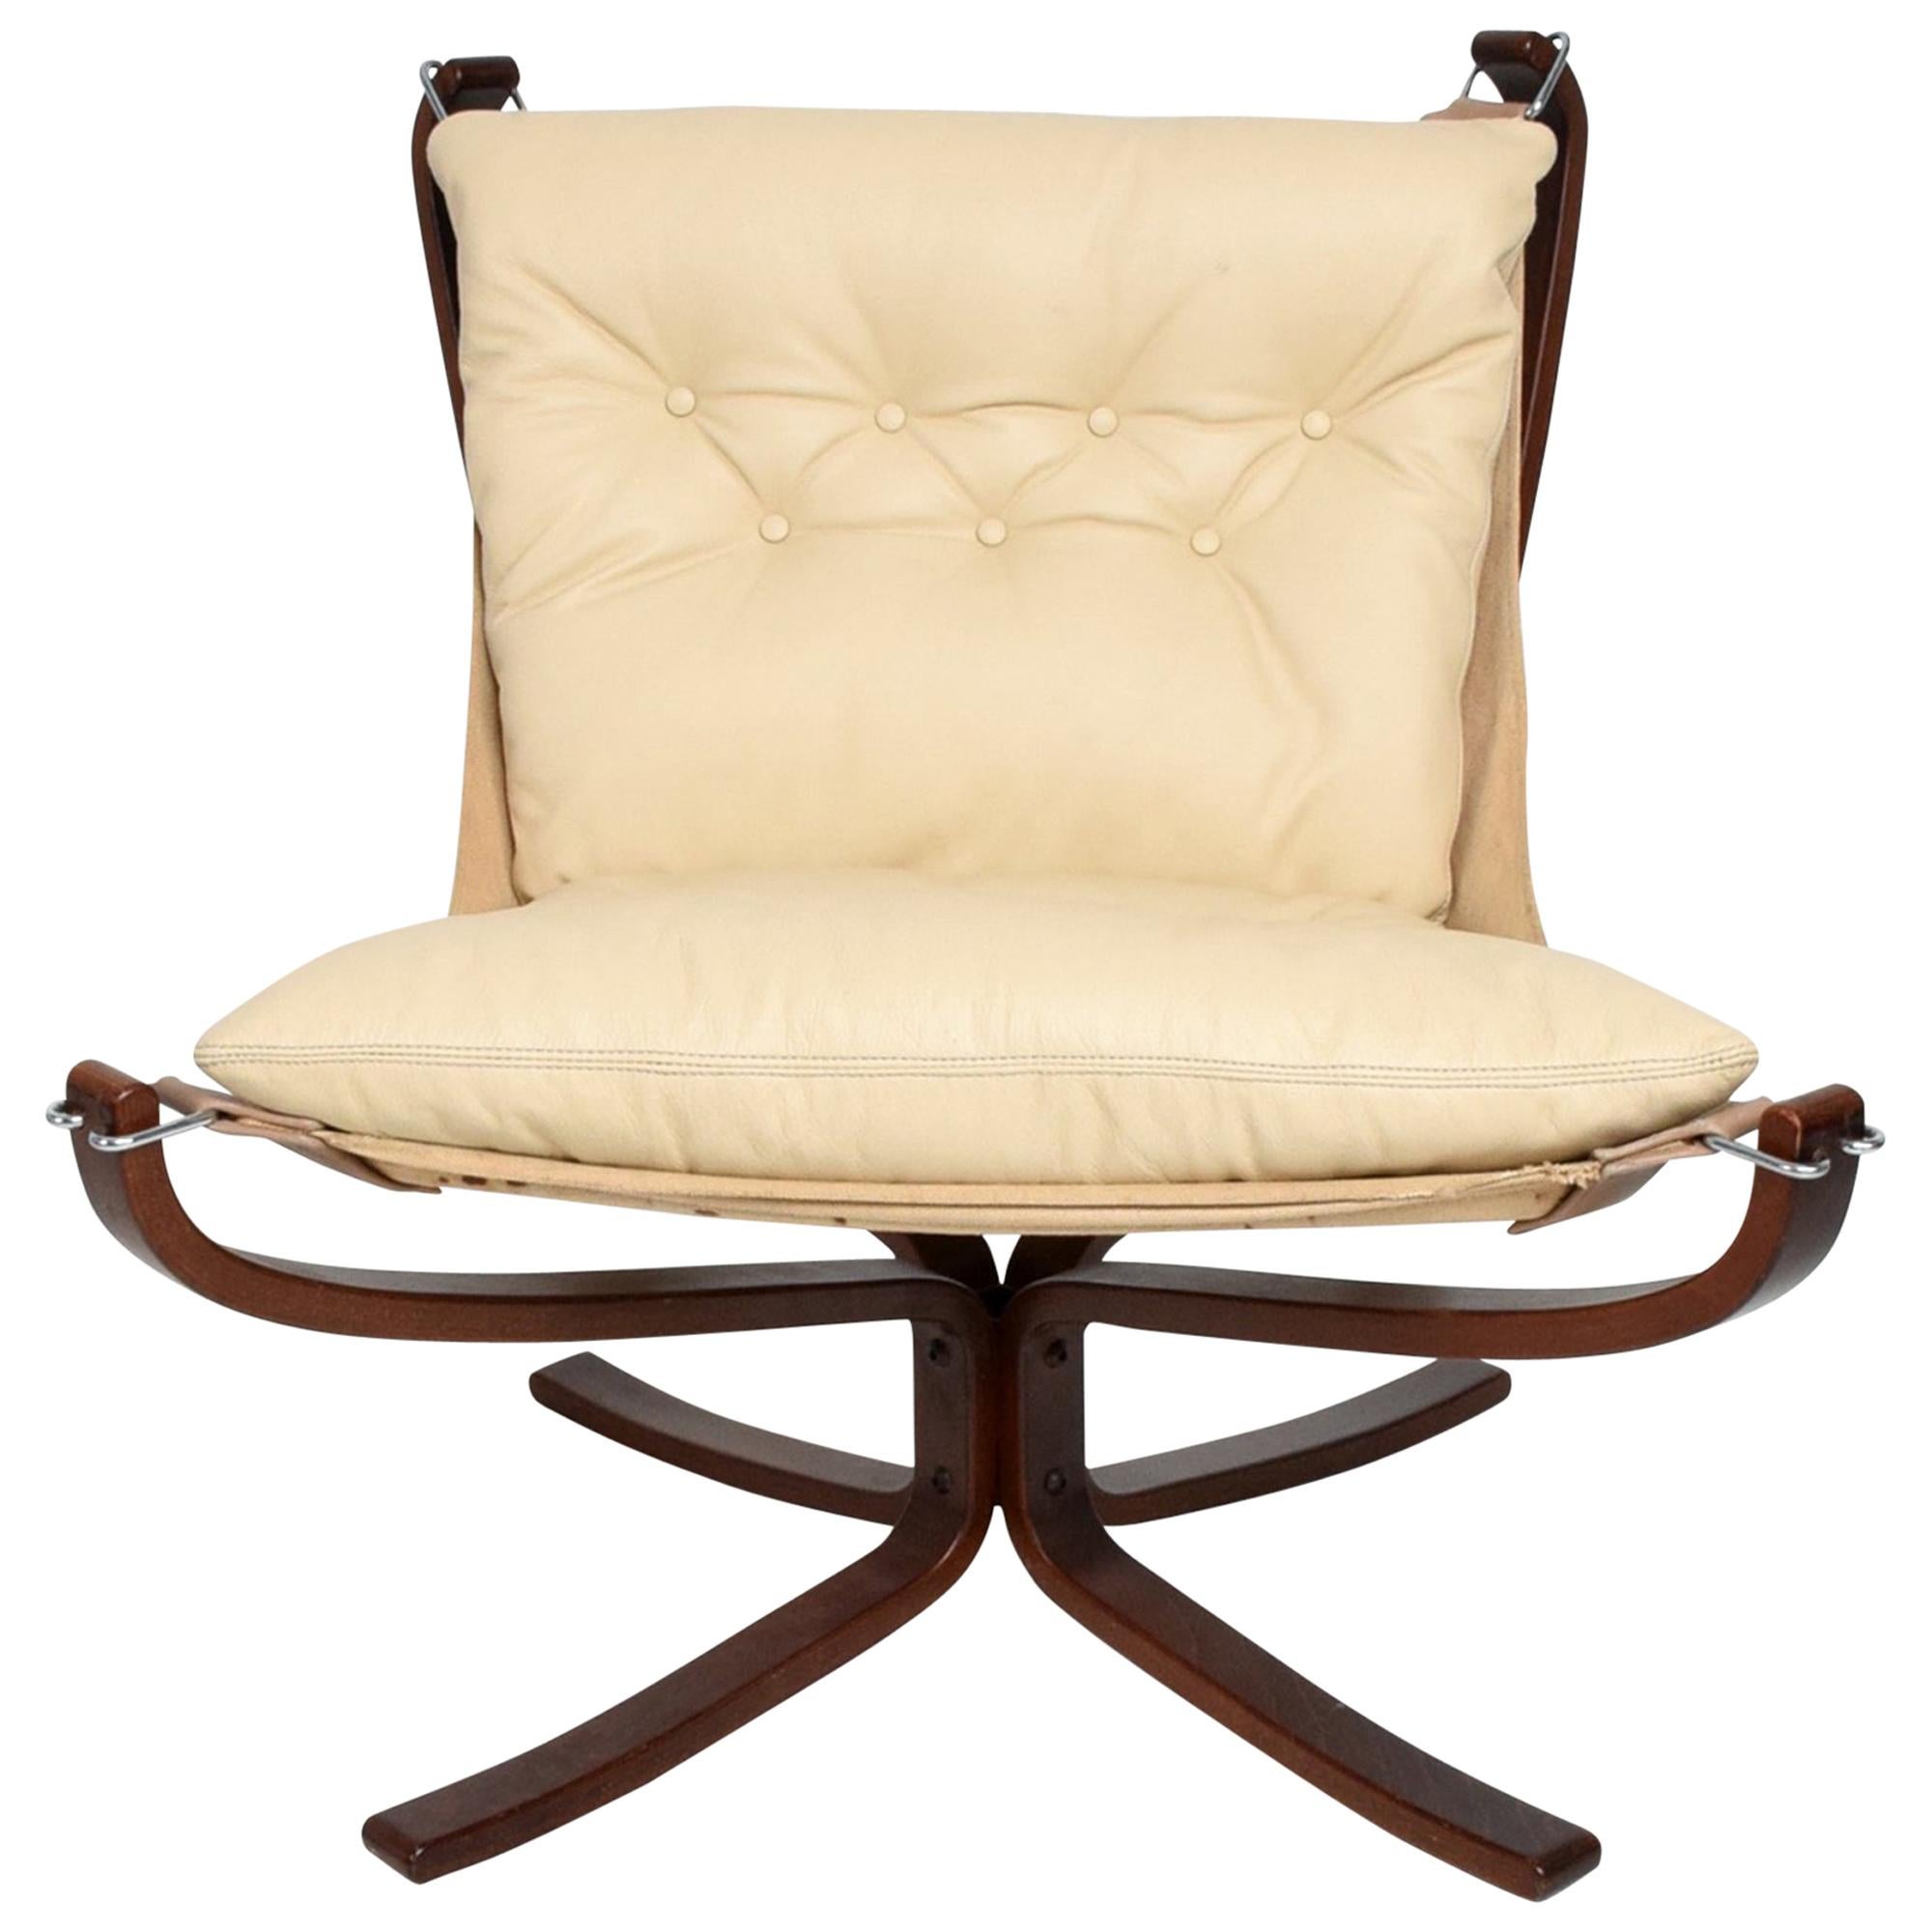 1970s Modern Falcon Chair by Sigurd Ressell for Vatne Møbler in Ivory Leather